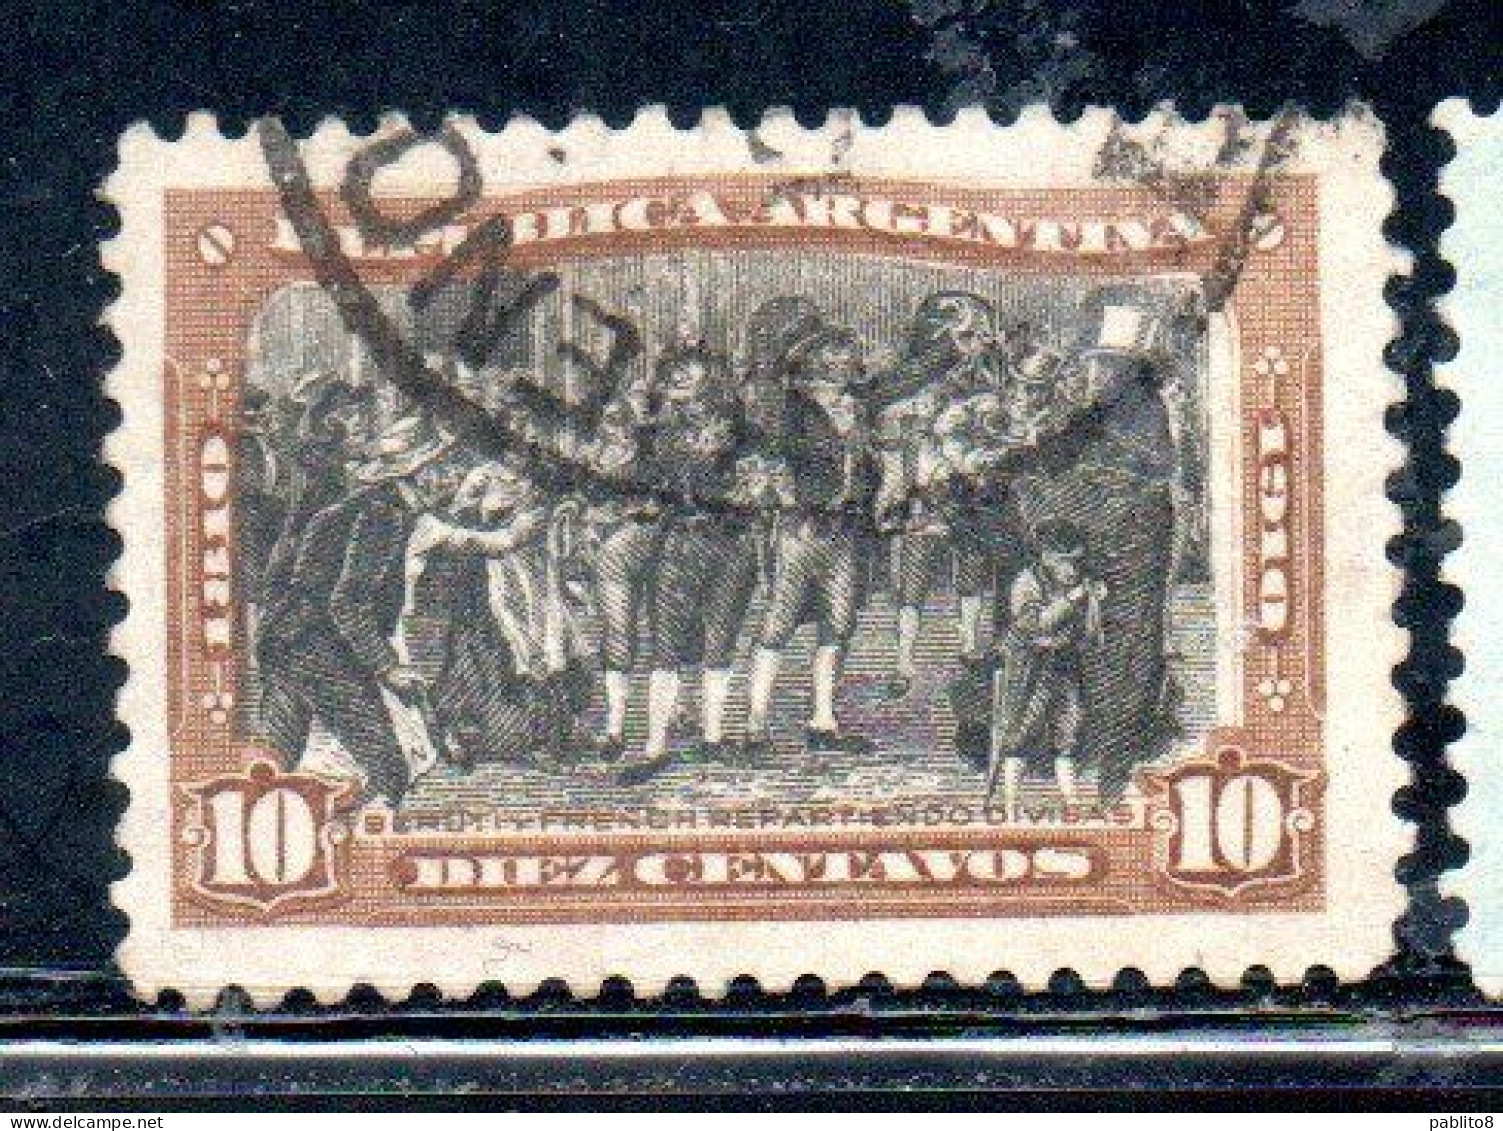 ARGENTINA 1910 ANTONIO LUIS BERUTI AND FRENCH DISTRIBUTING BADGES 10c USED USADO OBLITERE' - Used Stamps